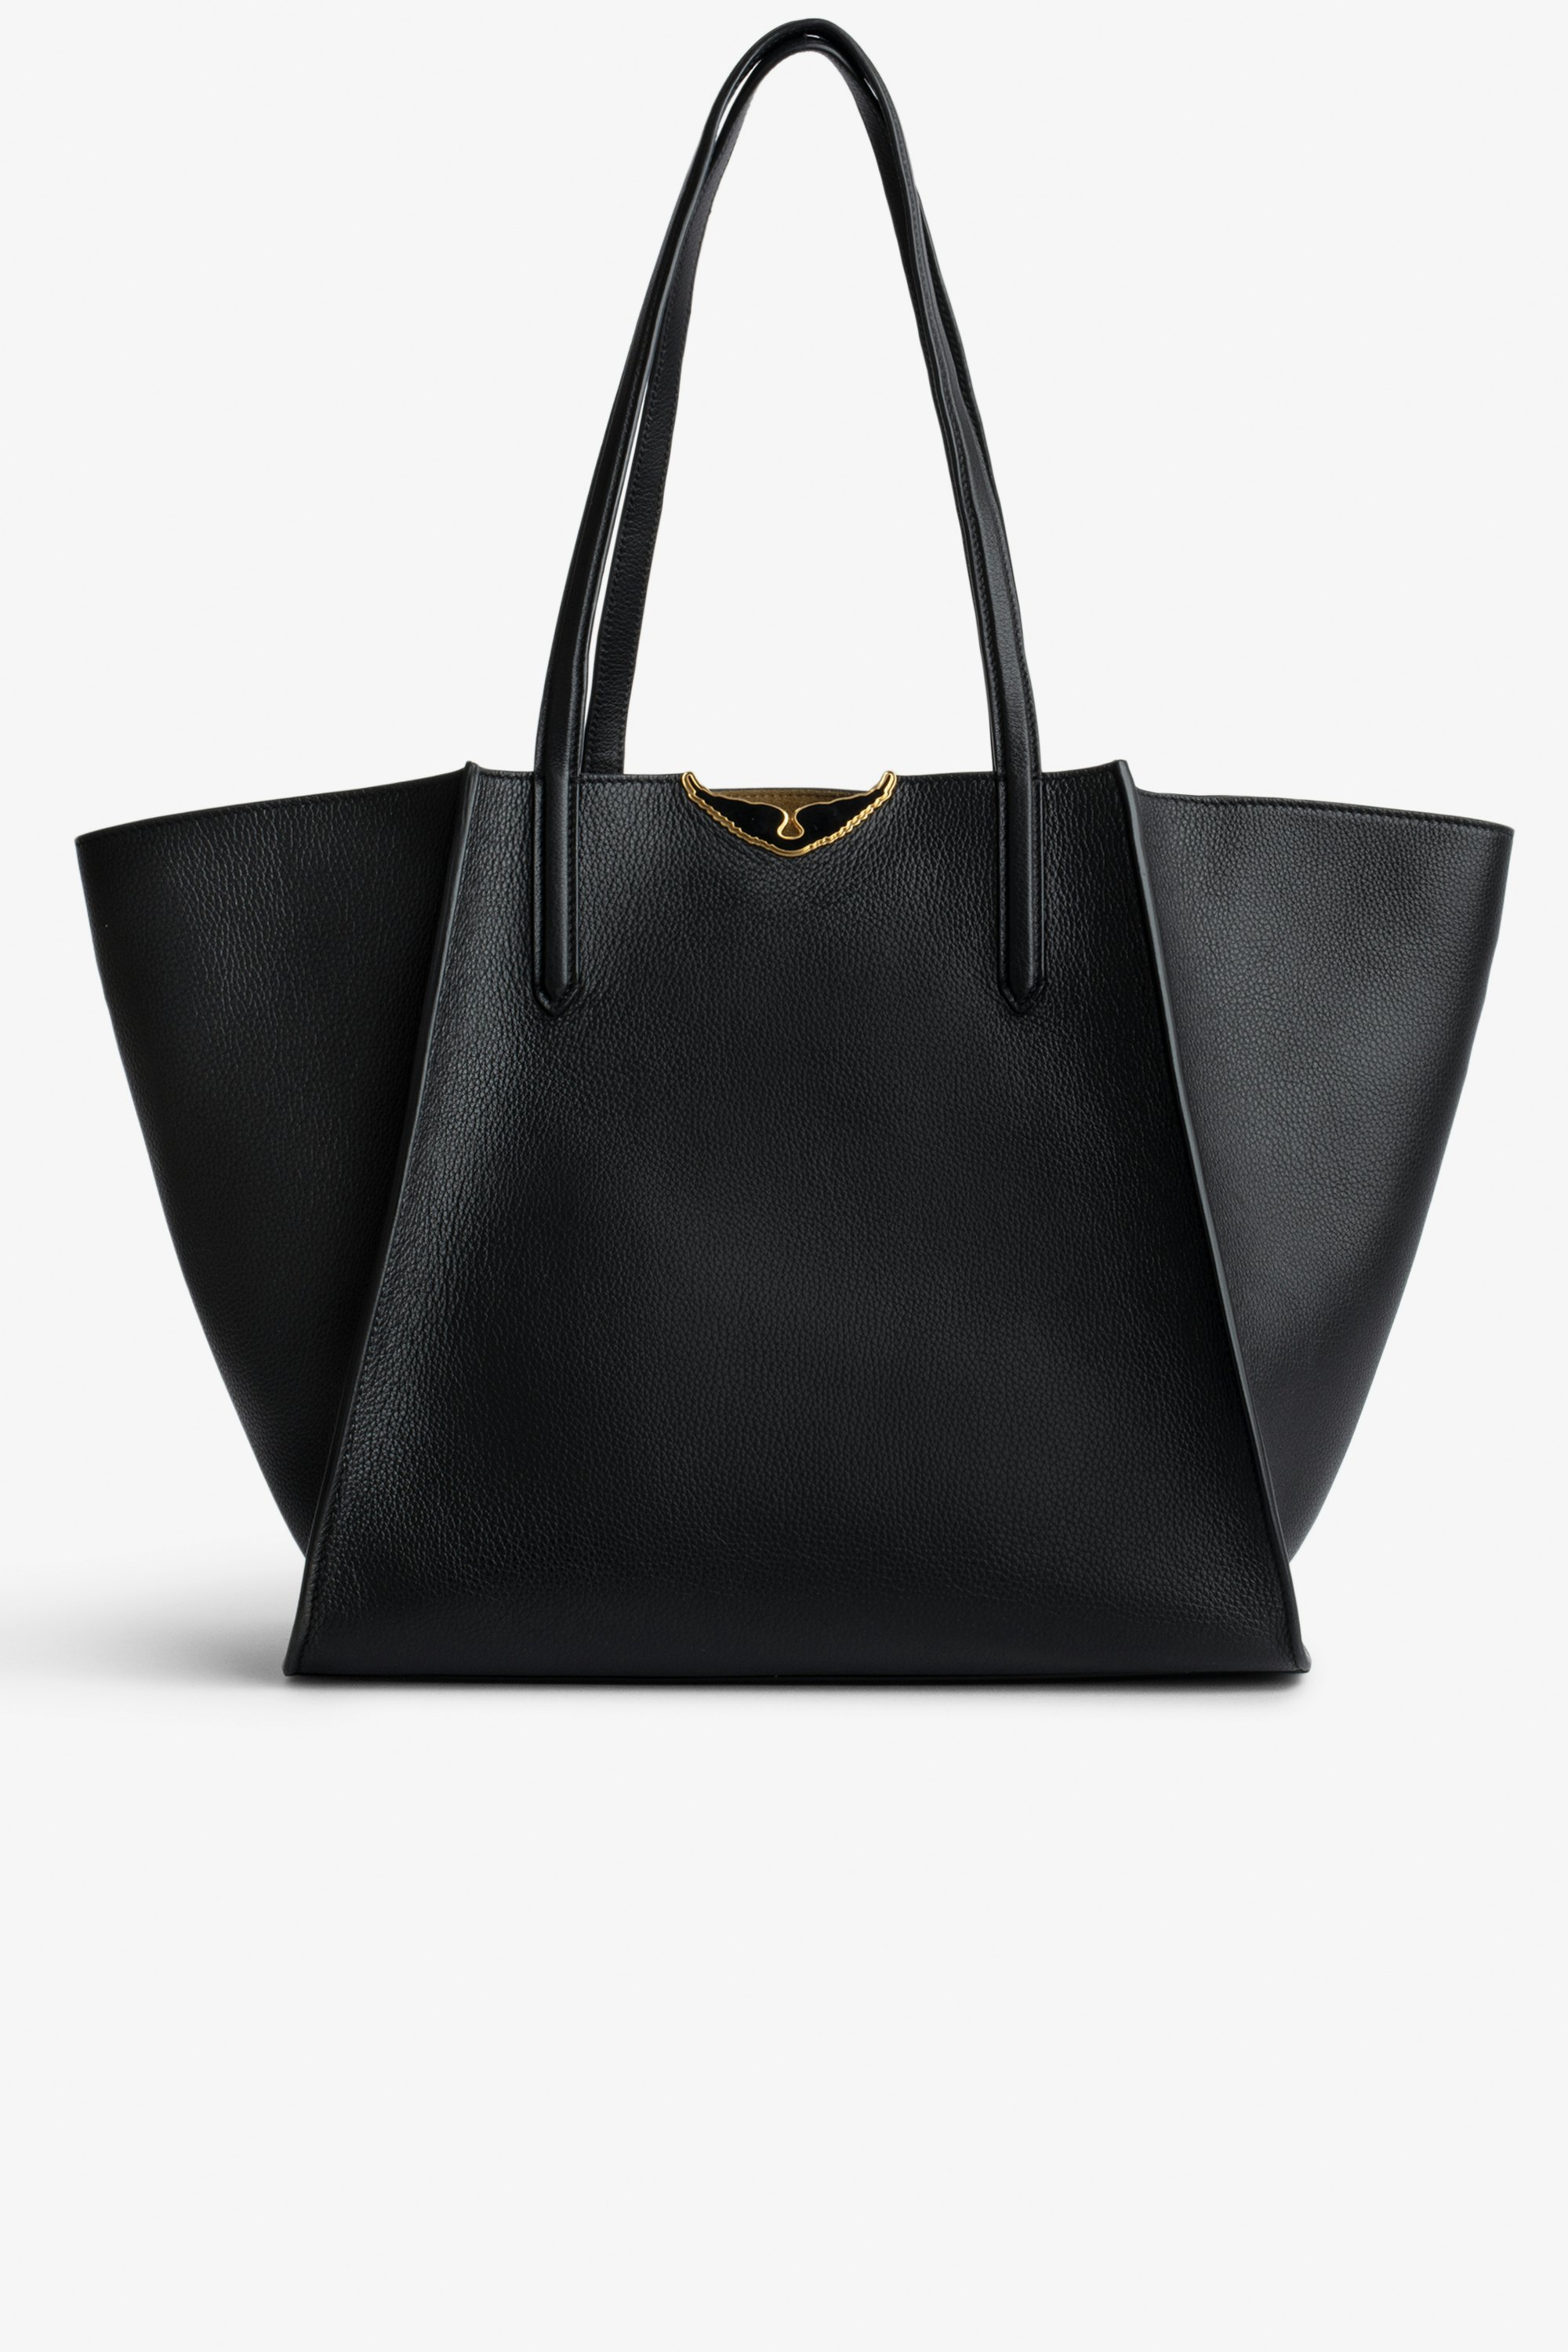 Le Borderline Bag Women's tote bag in black grained leather and khaki suede with black lacquered wings.